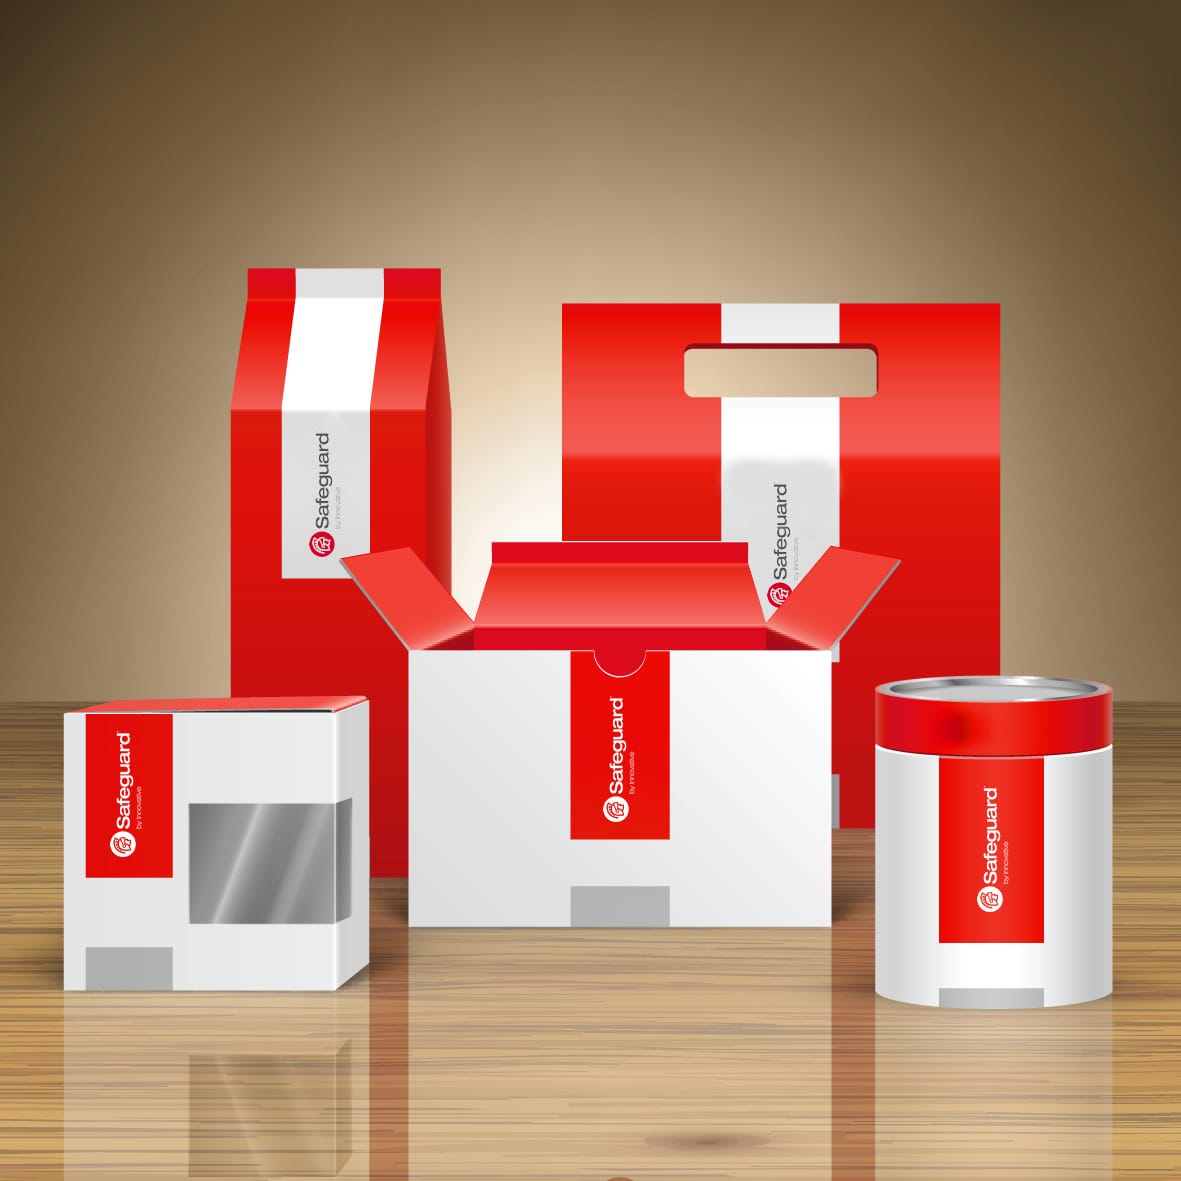 Safeguard-branded boxes and storage containers